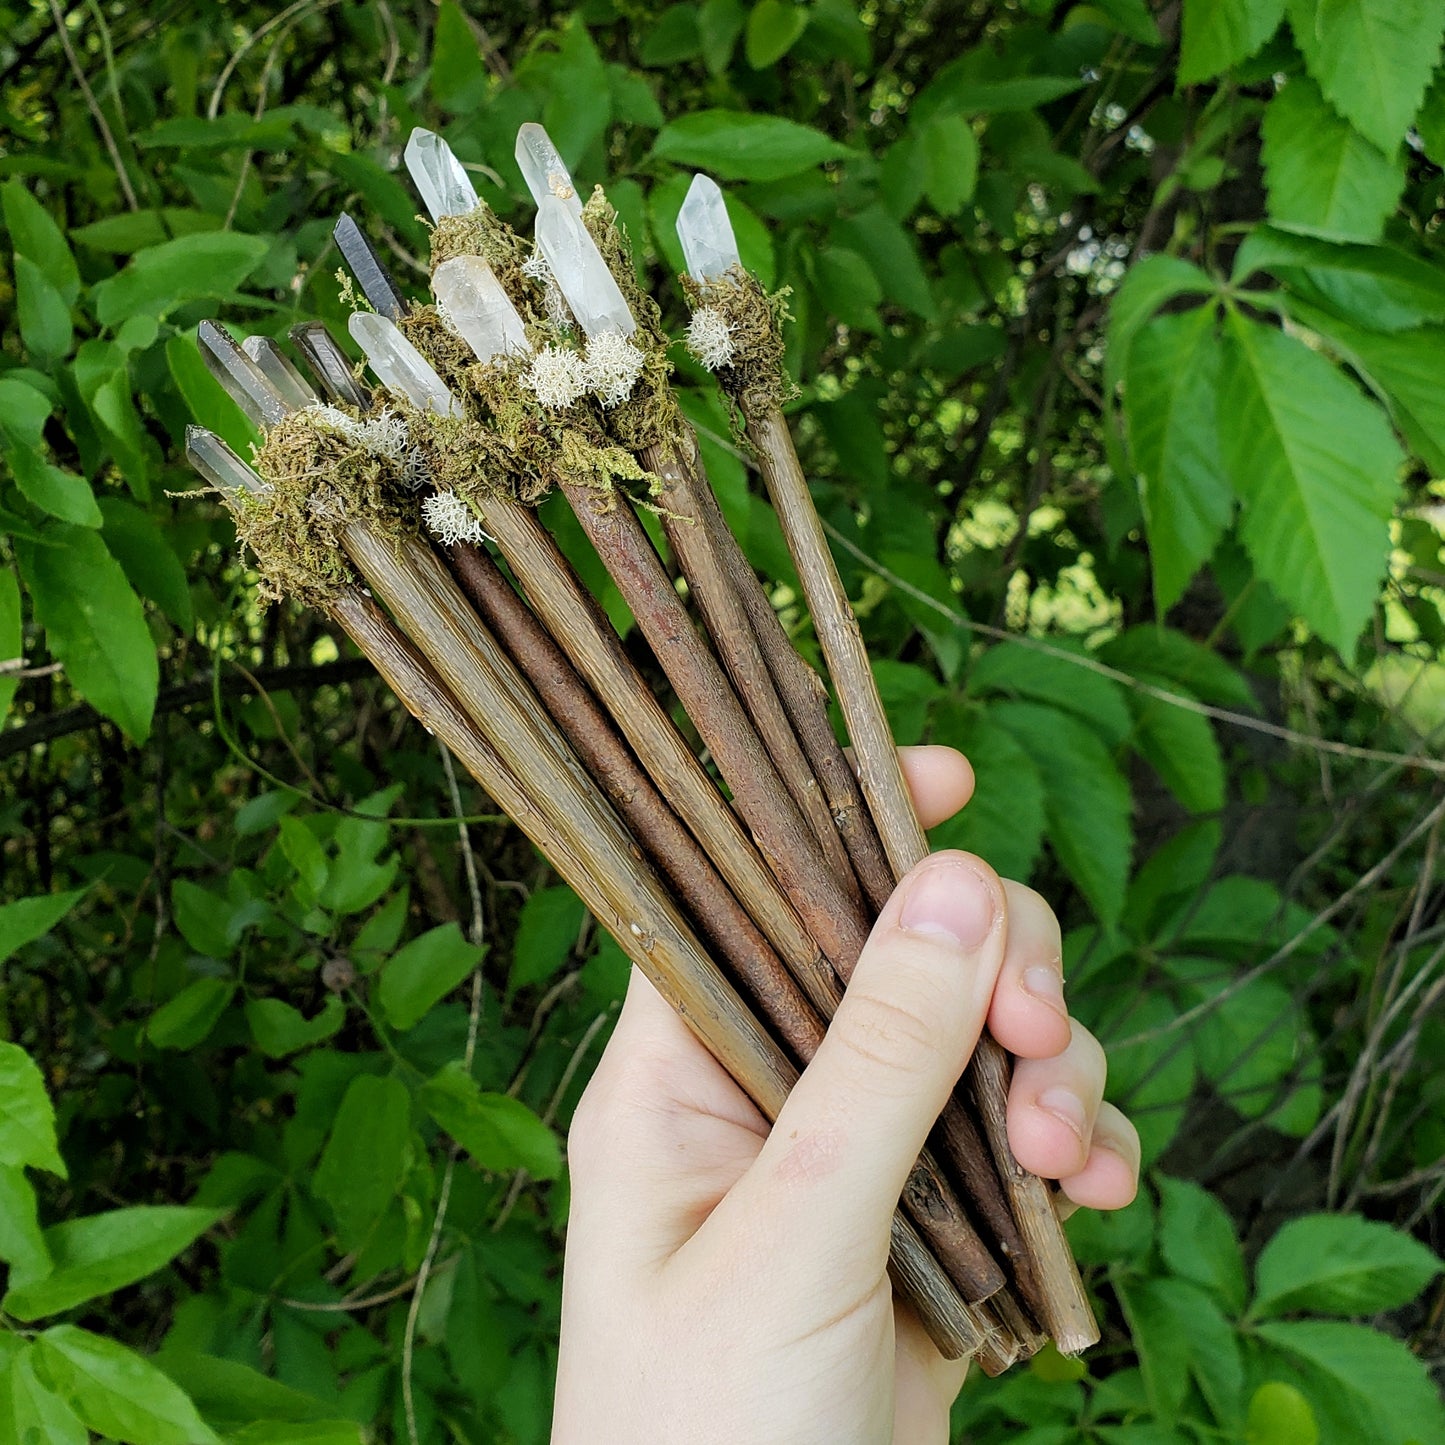 Crystal Willow Wood Wands